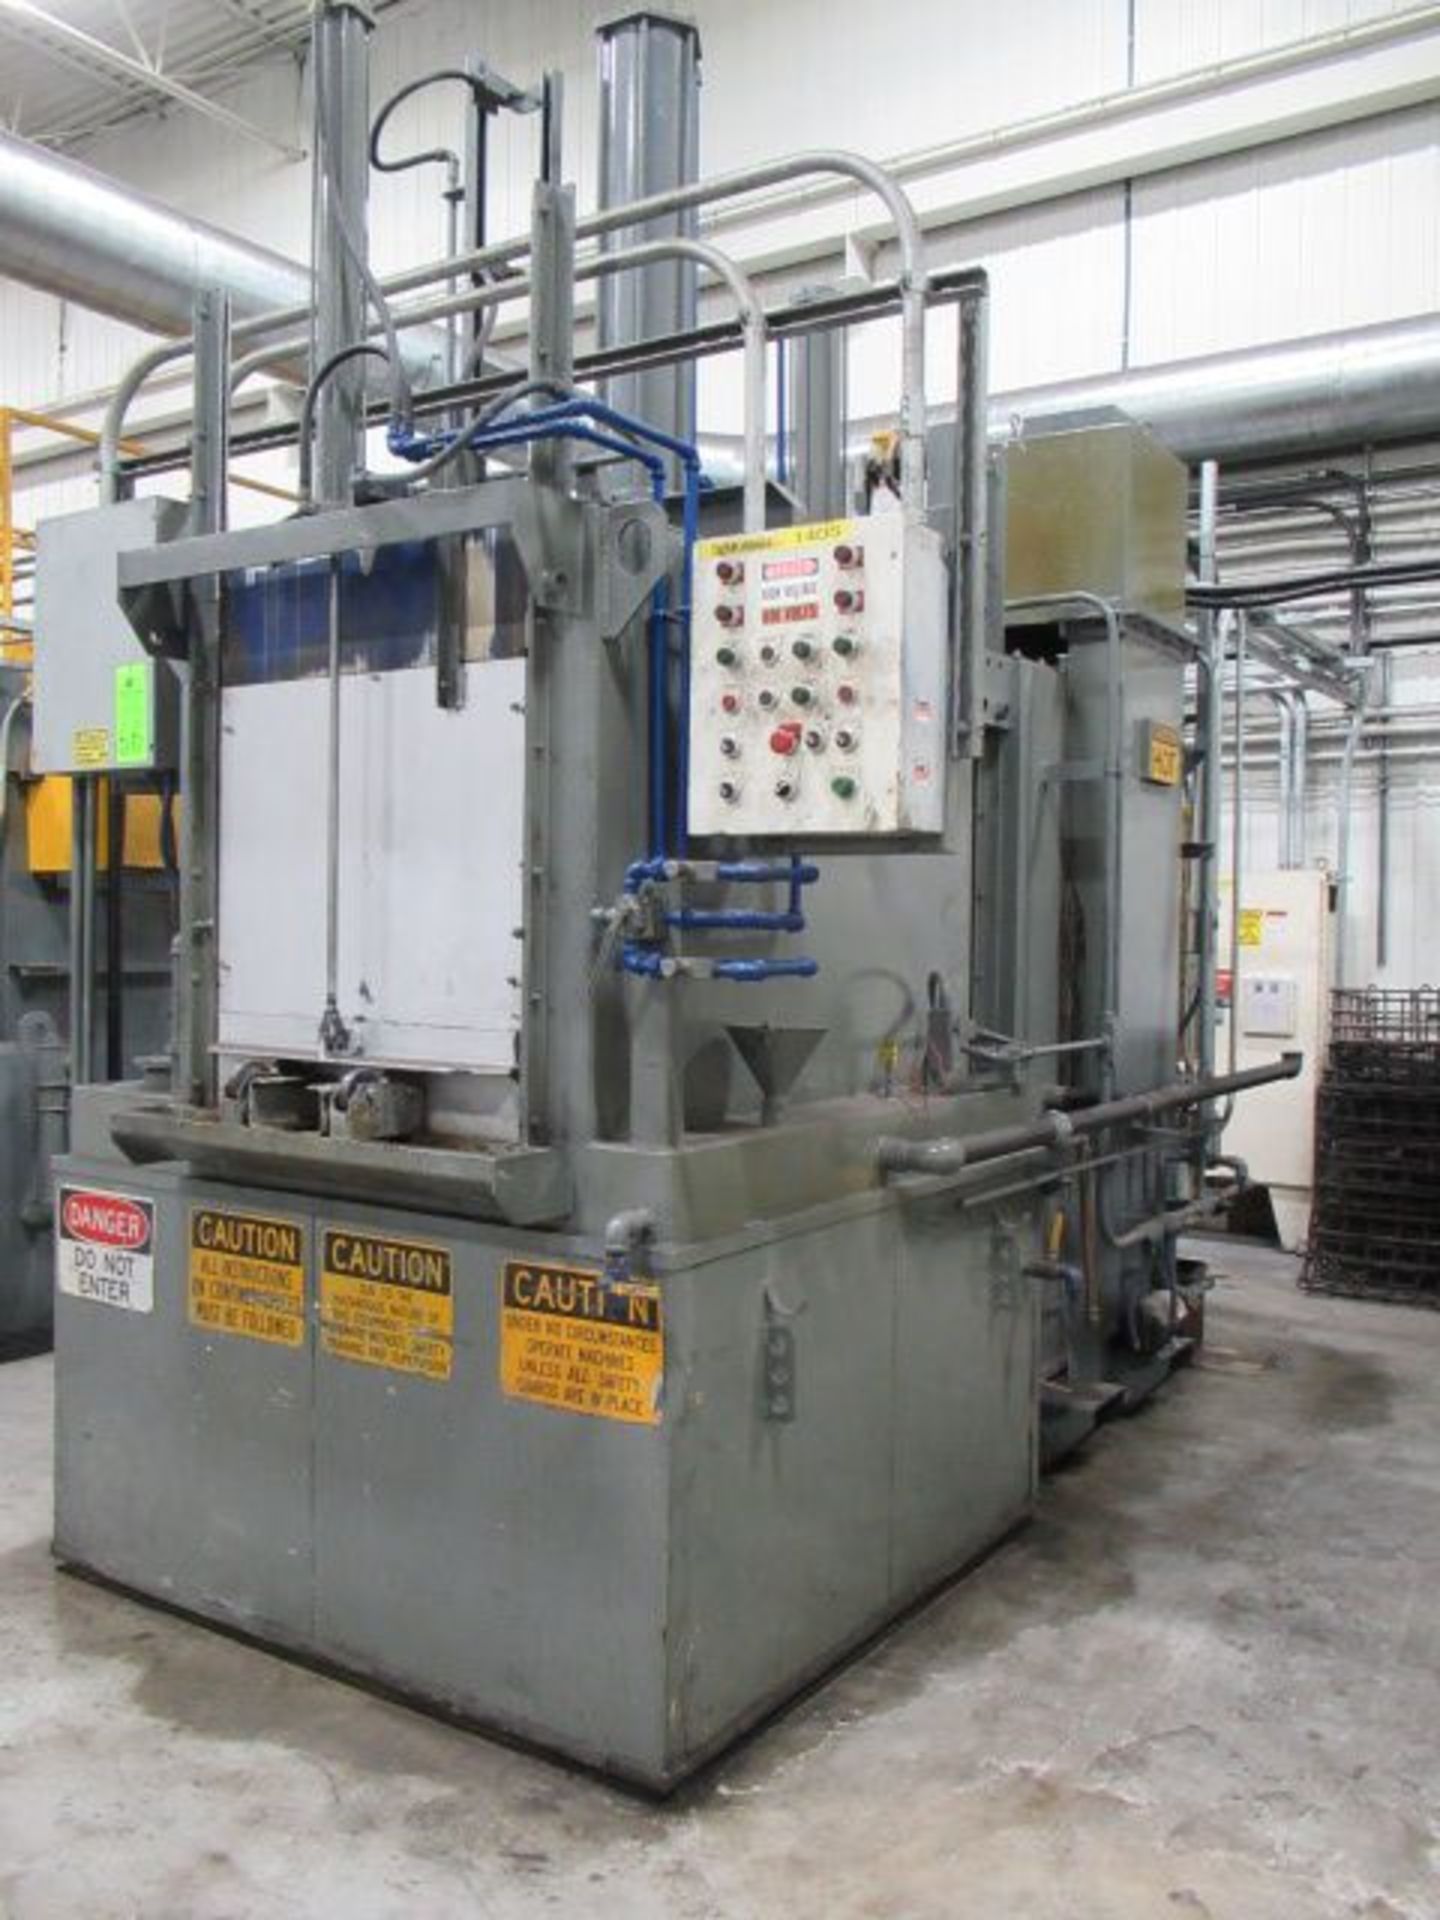 1999 SURFACE COMBUSTION WILLIAMS Pre/Post Carburizing 2 Stage Wash System, s/n 02498, w/ 24”x36” - Image 2 of 4